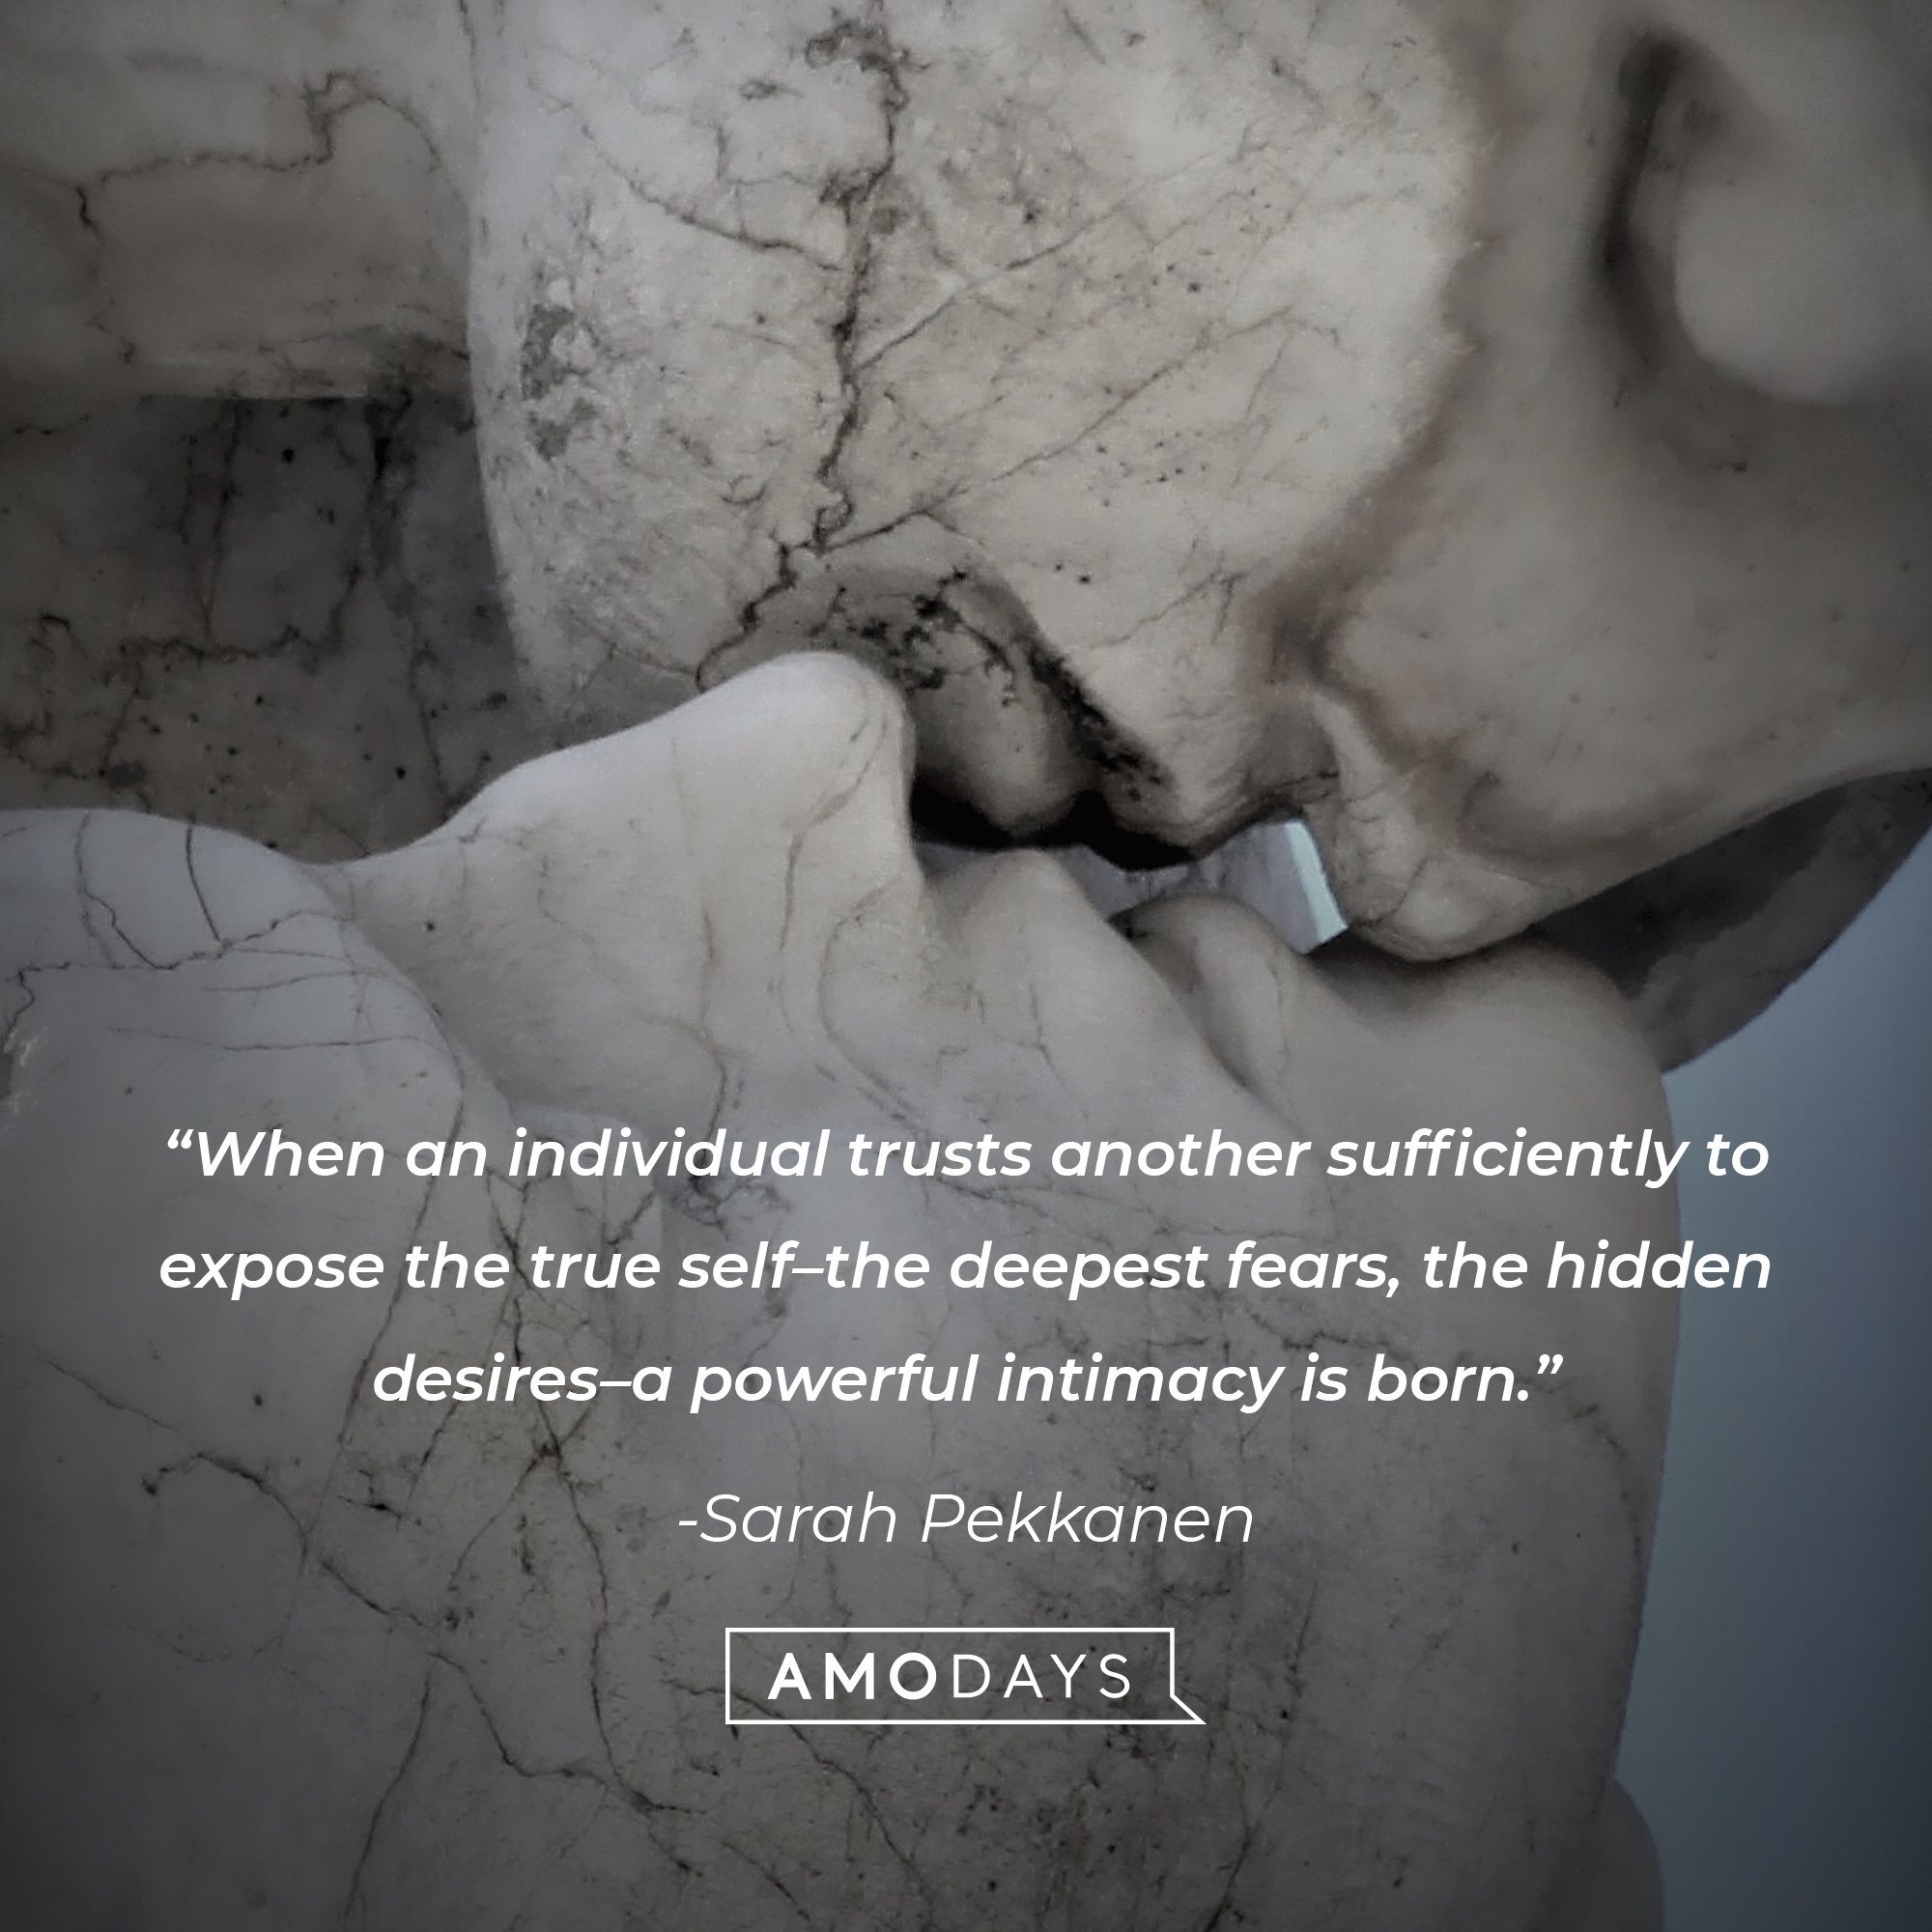  Sarah Pekkanen’s quote:"When an individual trusts another sufficiently to expose the true self—the deepest fears, the hidden desires—a powerful intimacy is born.” | Image: AmoDays